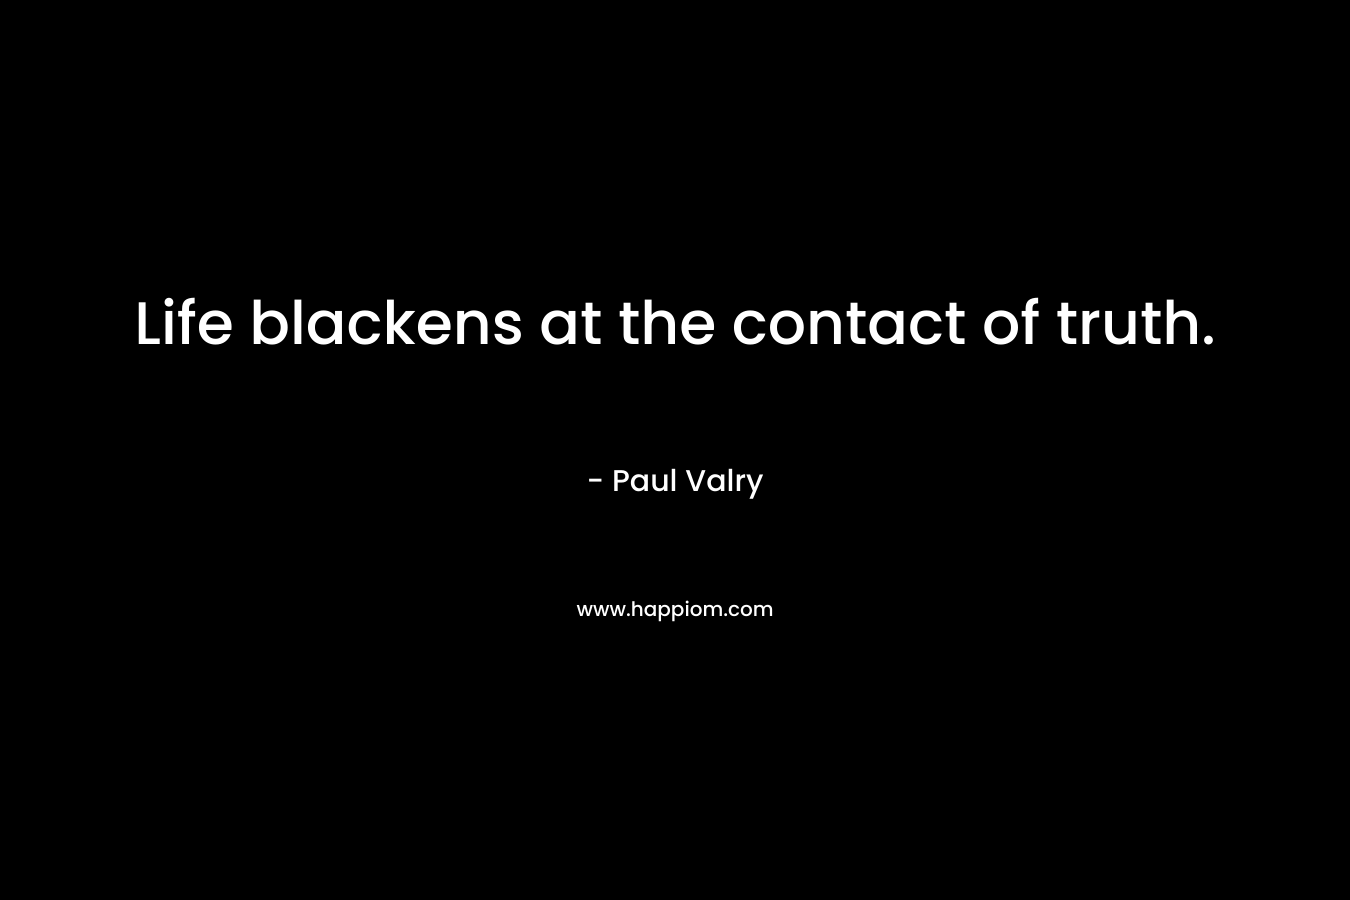 Life blackens at the contact of truth.